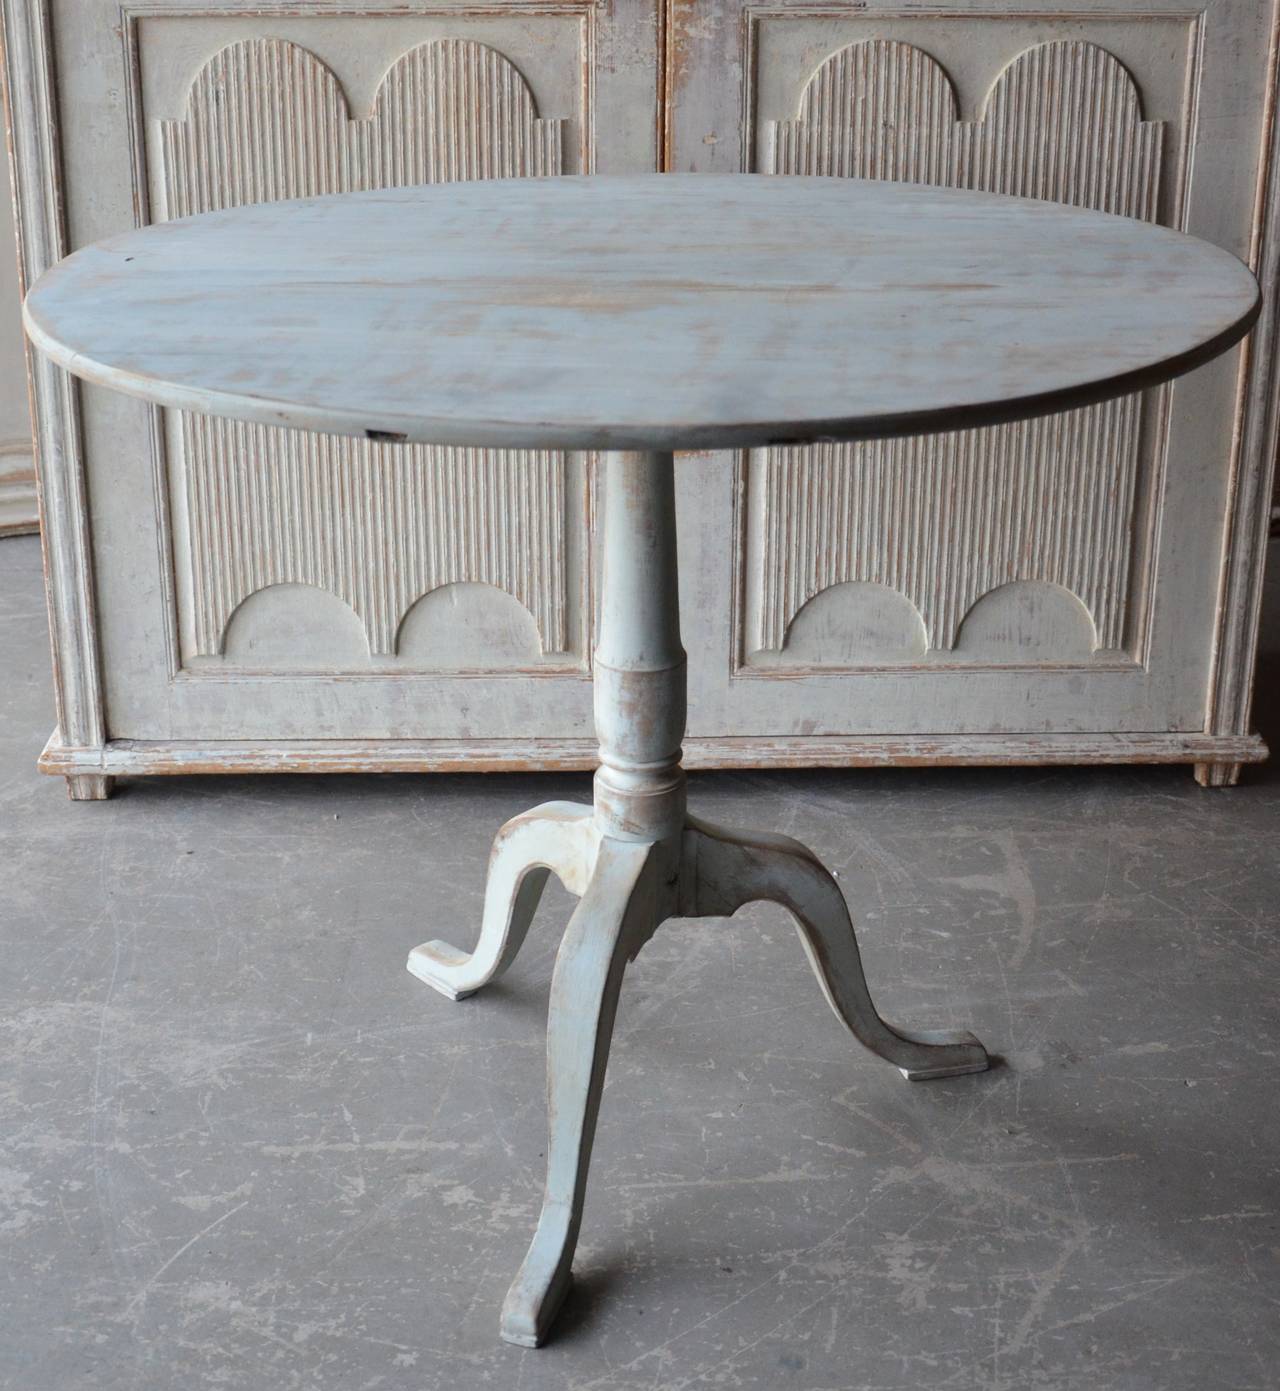 19th century large round tilt top pedestal table in birch wood, Sweden, circa 1850 with turned base supported by beautifully carved legs. Scrape back to traces of its original color blue color.